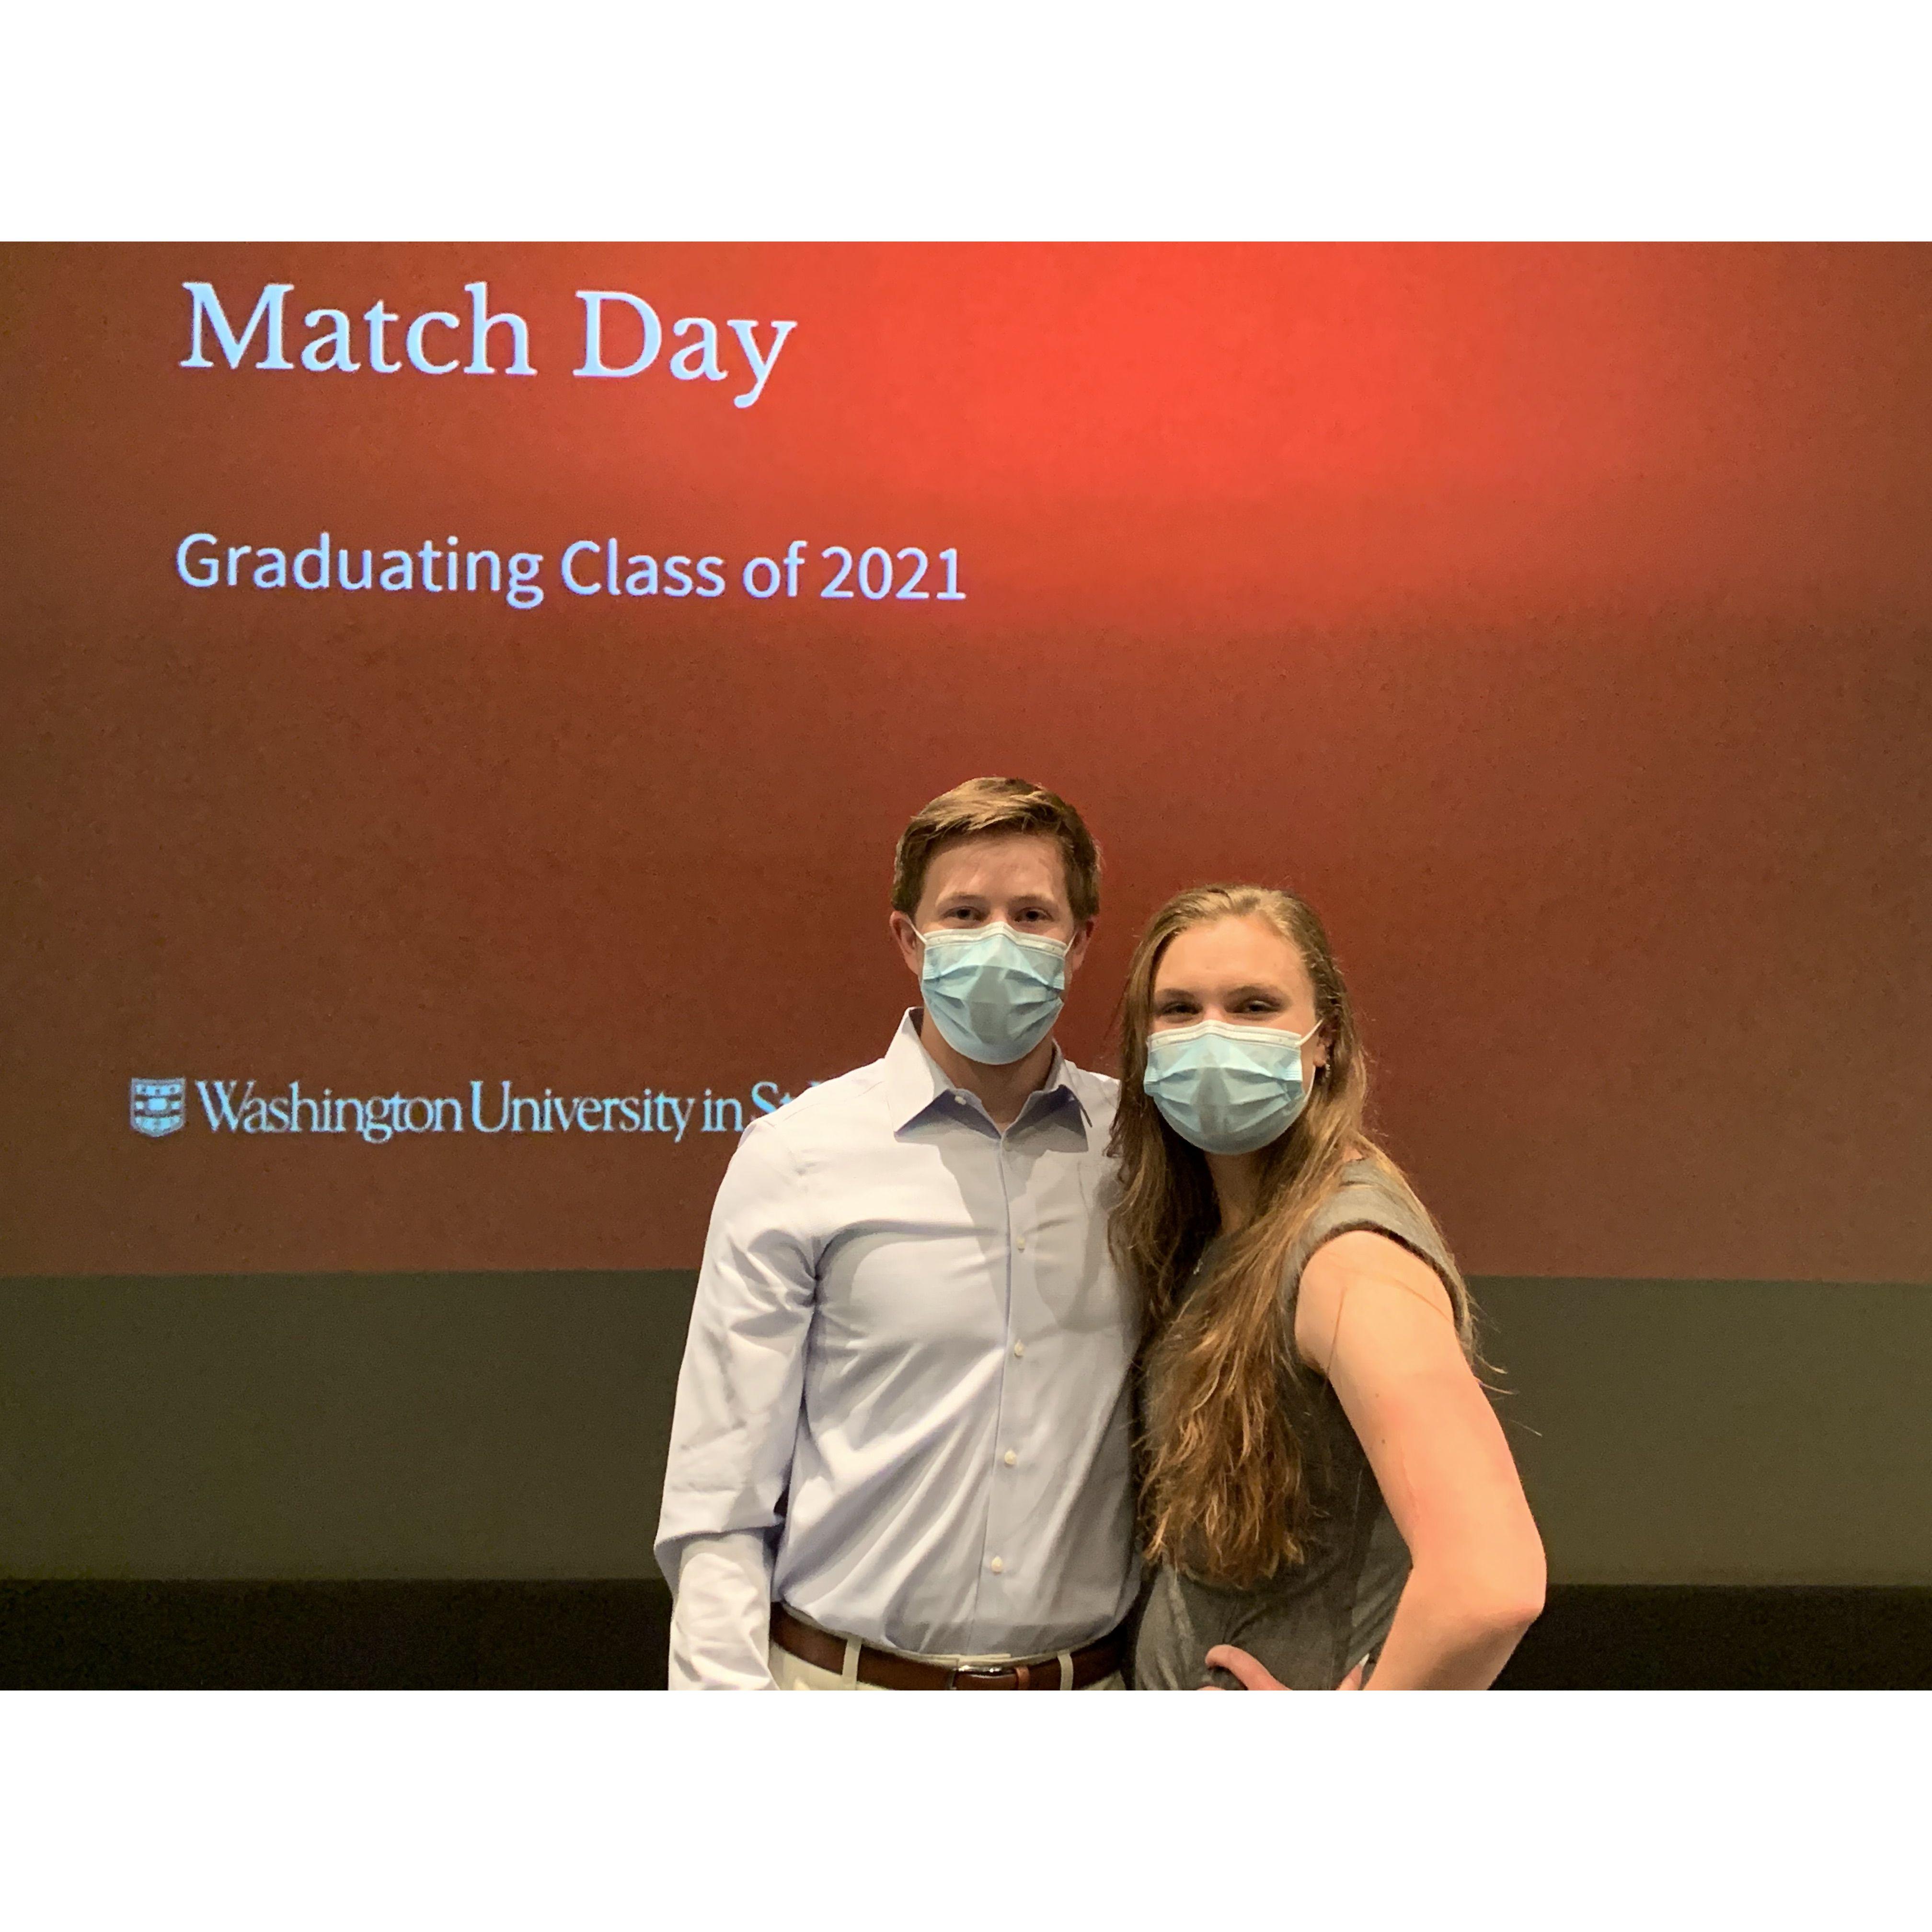 Carrie's Match Day 2021!